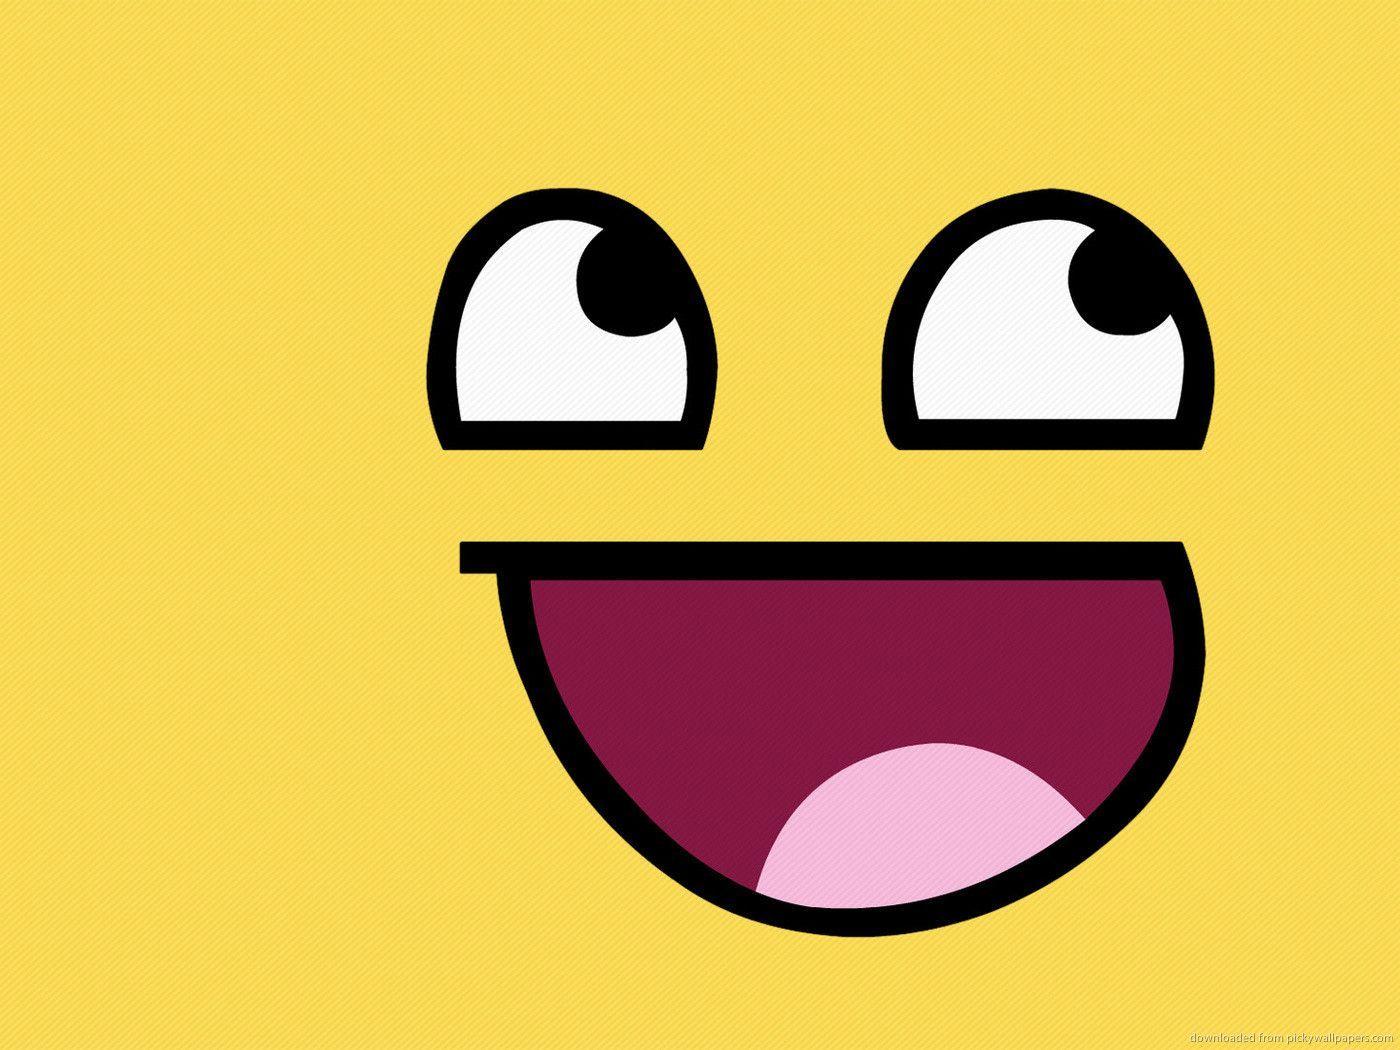 Download 1400x1050 Giant Awesome Smiley Wallpaper